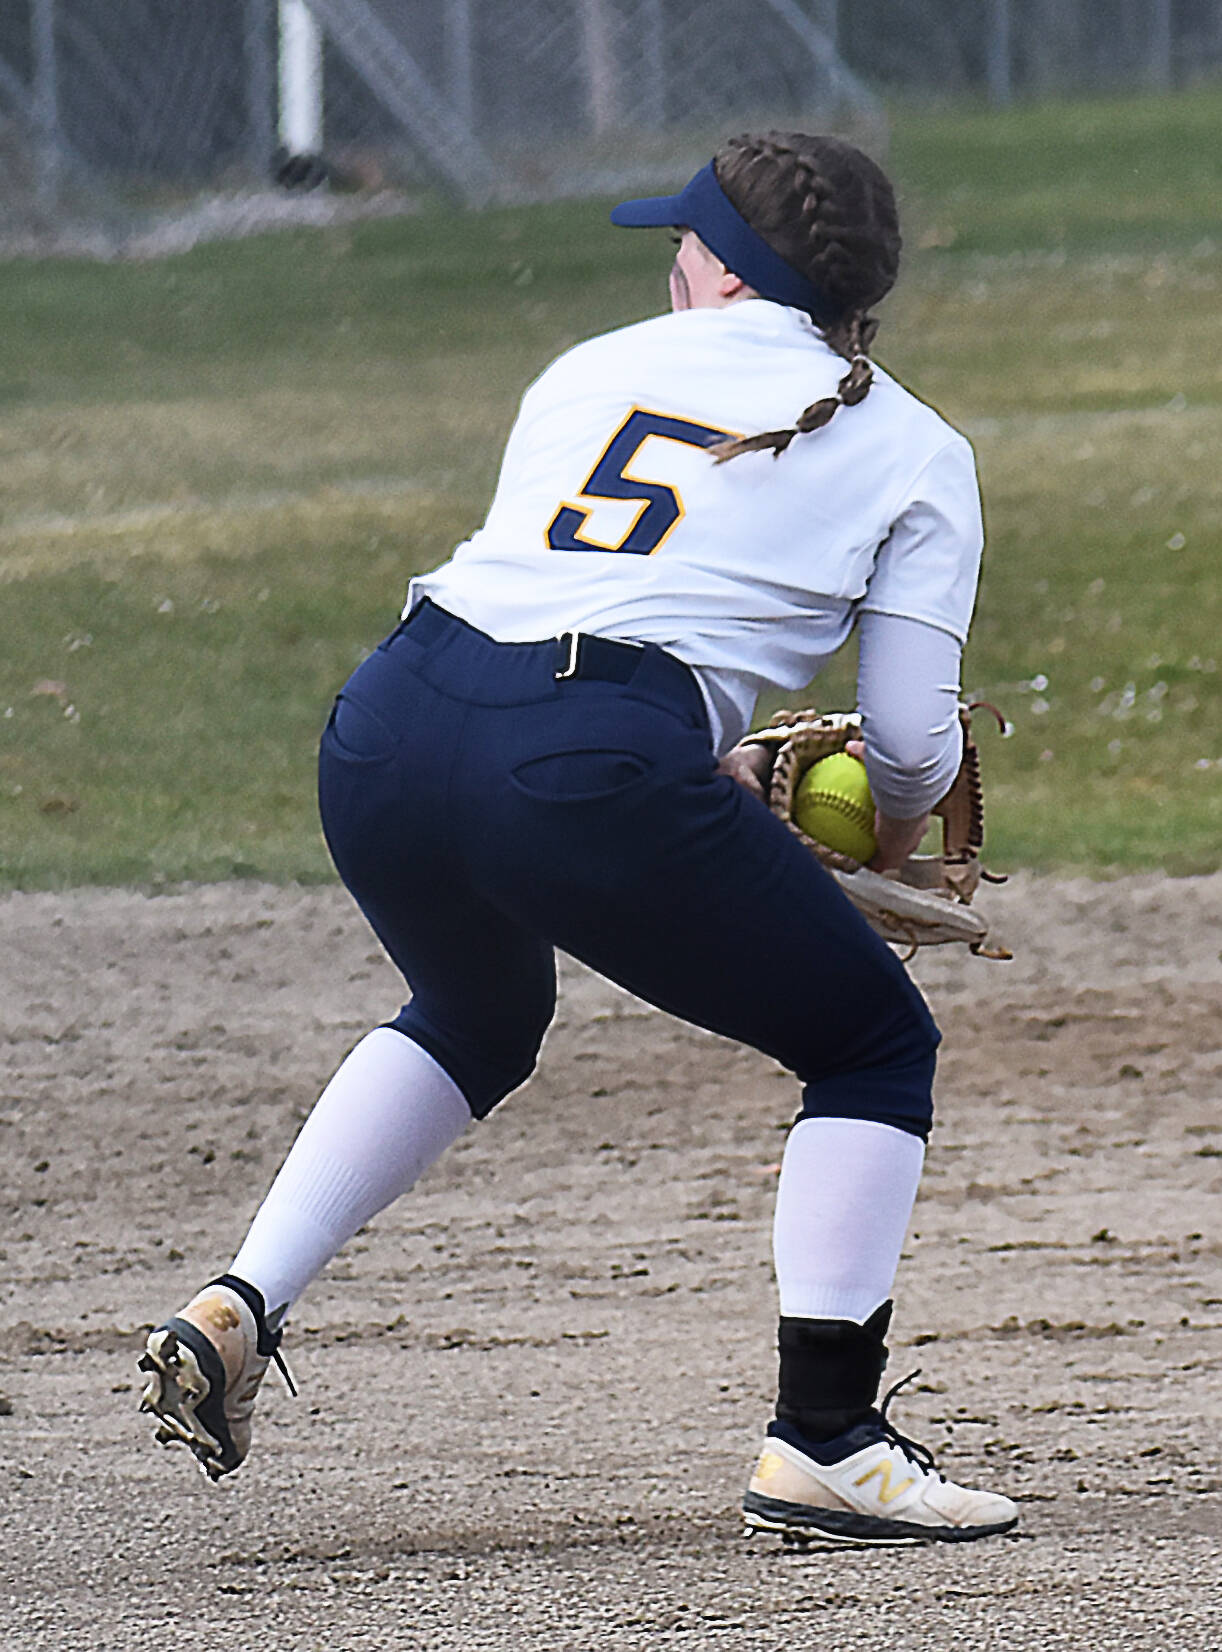 Brearley Jayne-Curfman snags the ball before throwing for the force out.